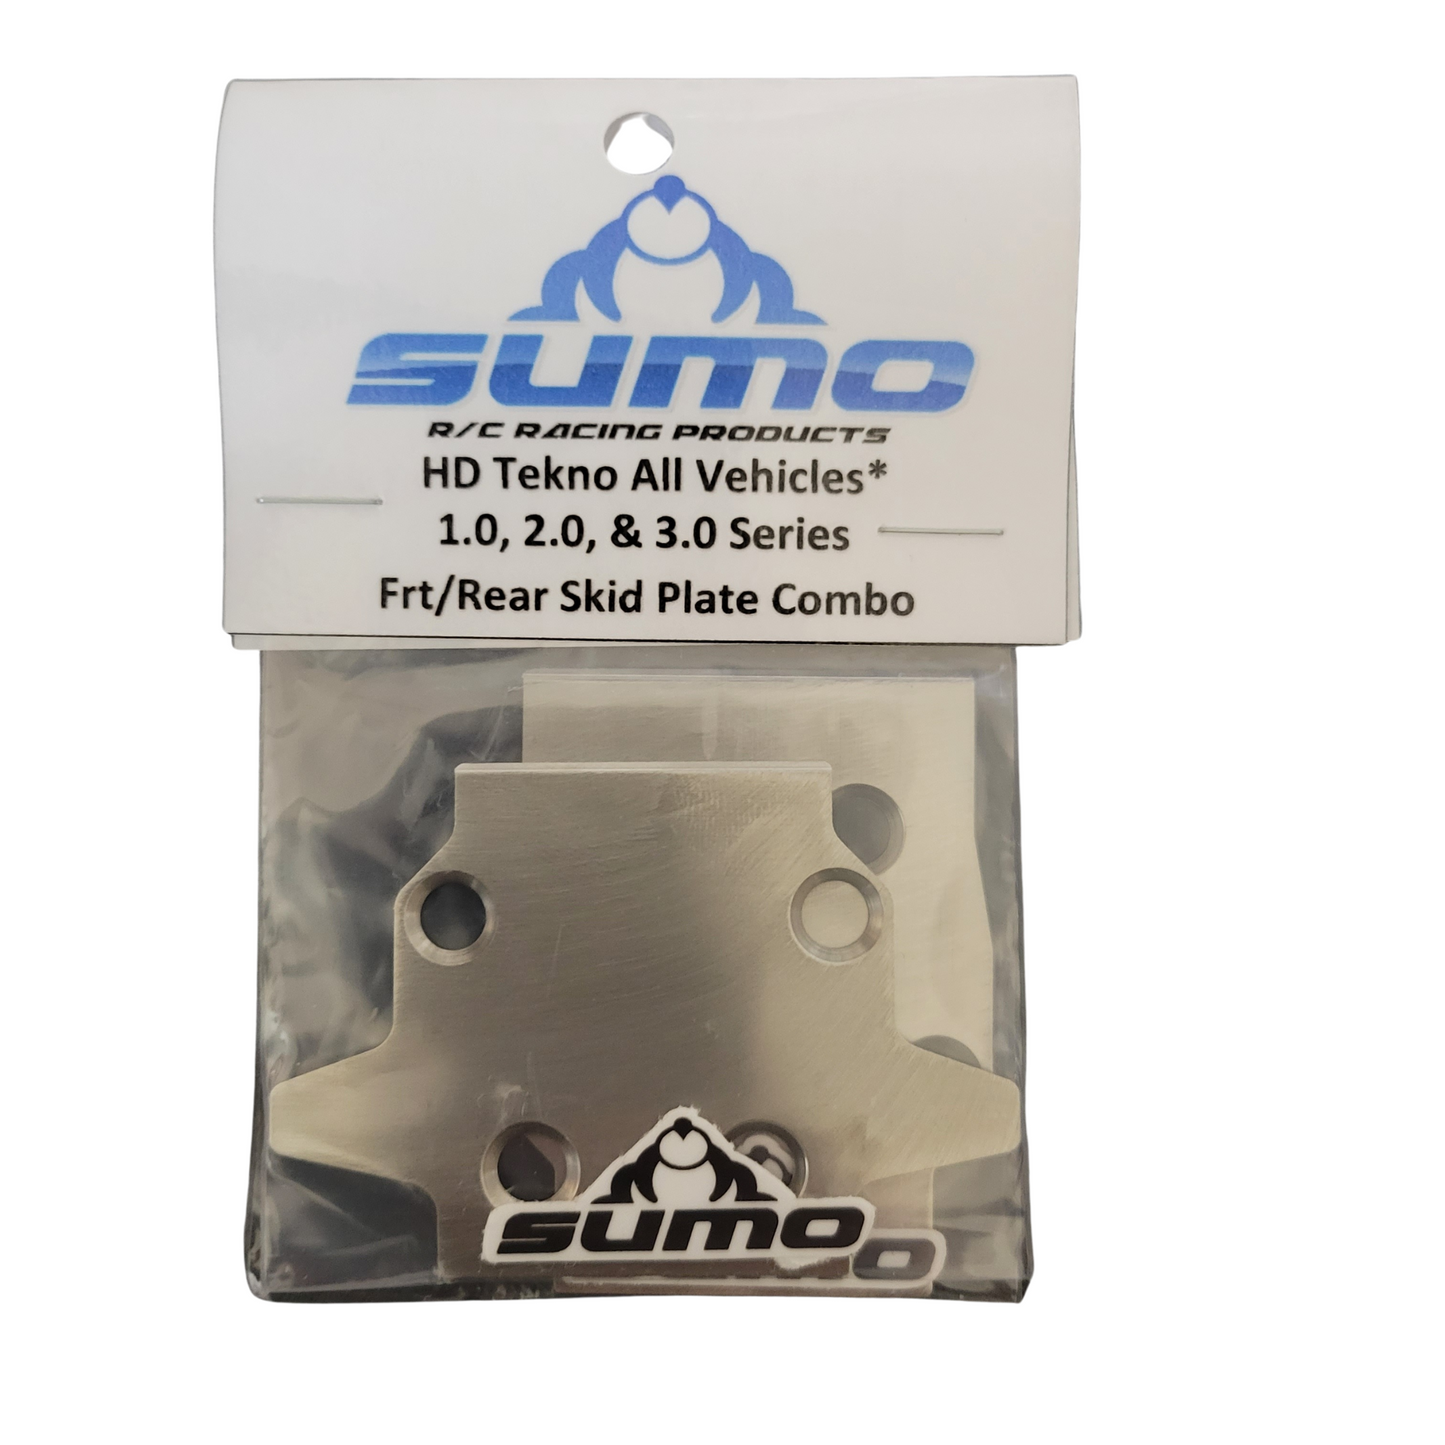 Sumo Racing Skid Plates for Tekno EB/NB48, ET/NT48, & SCT410 1.0, 2.0, 3.0 Models